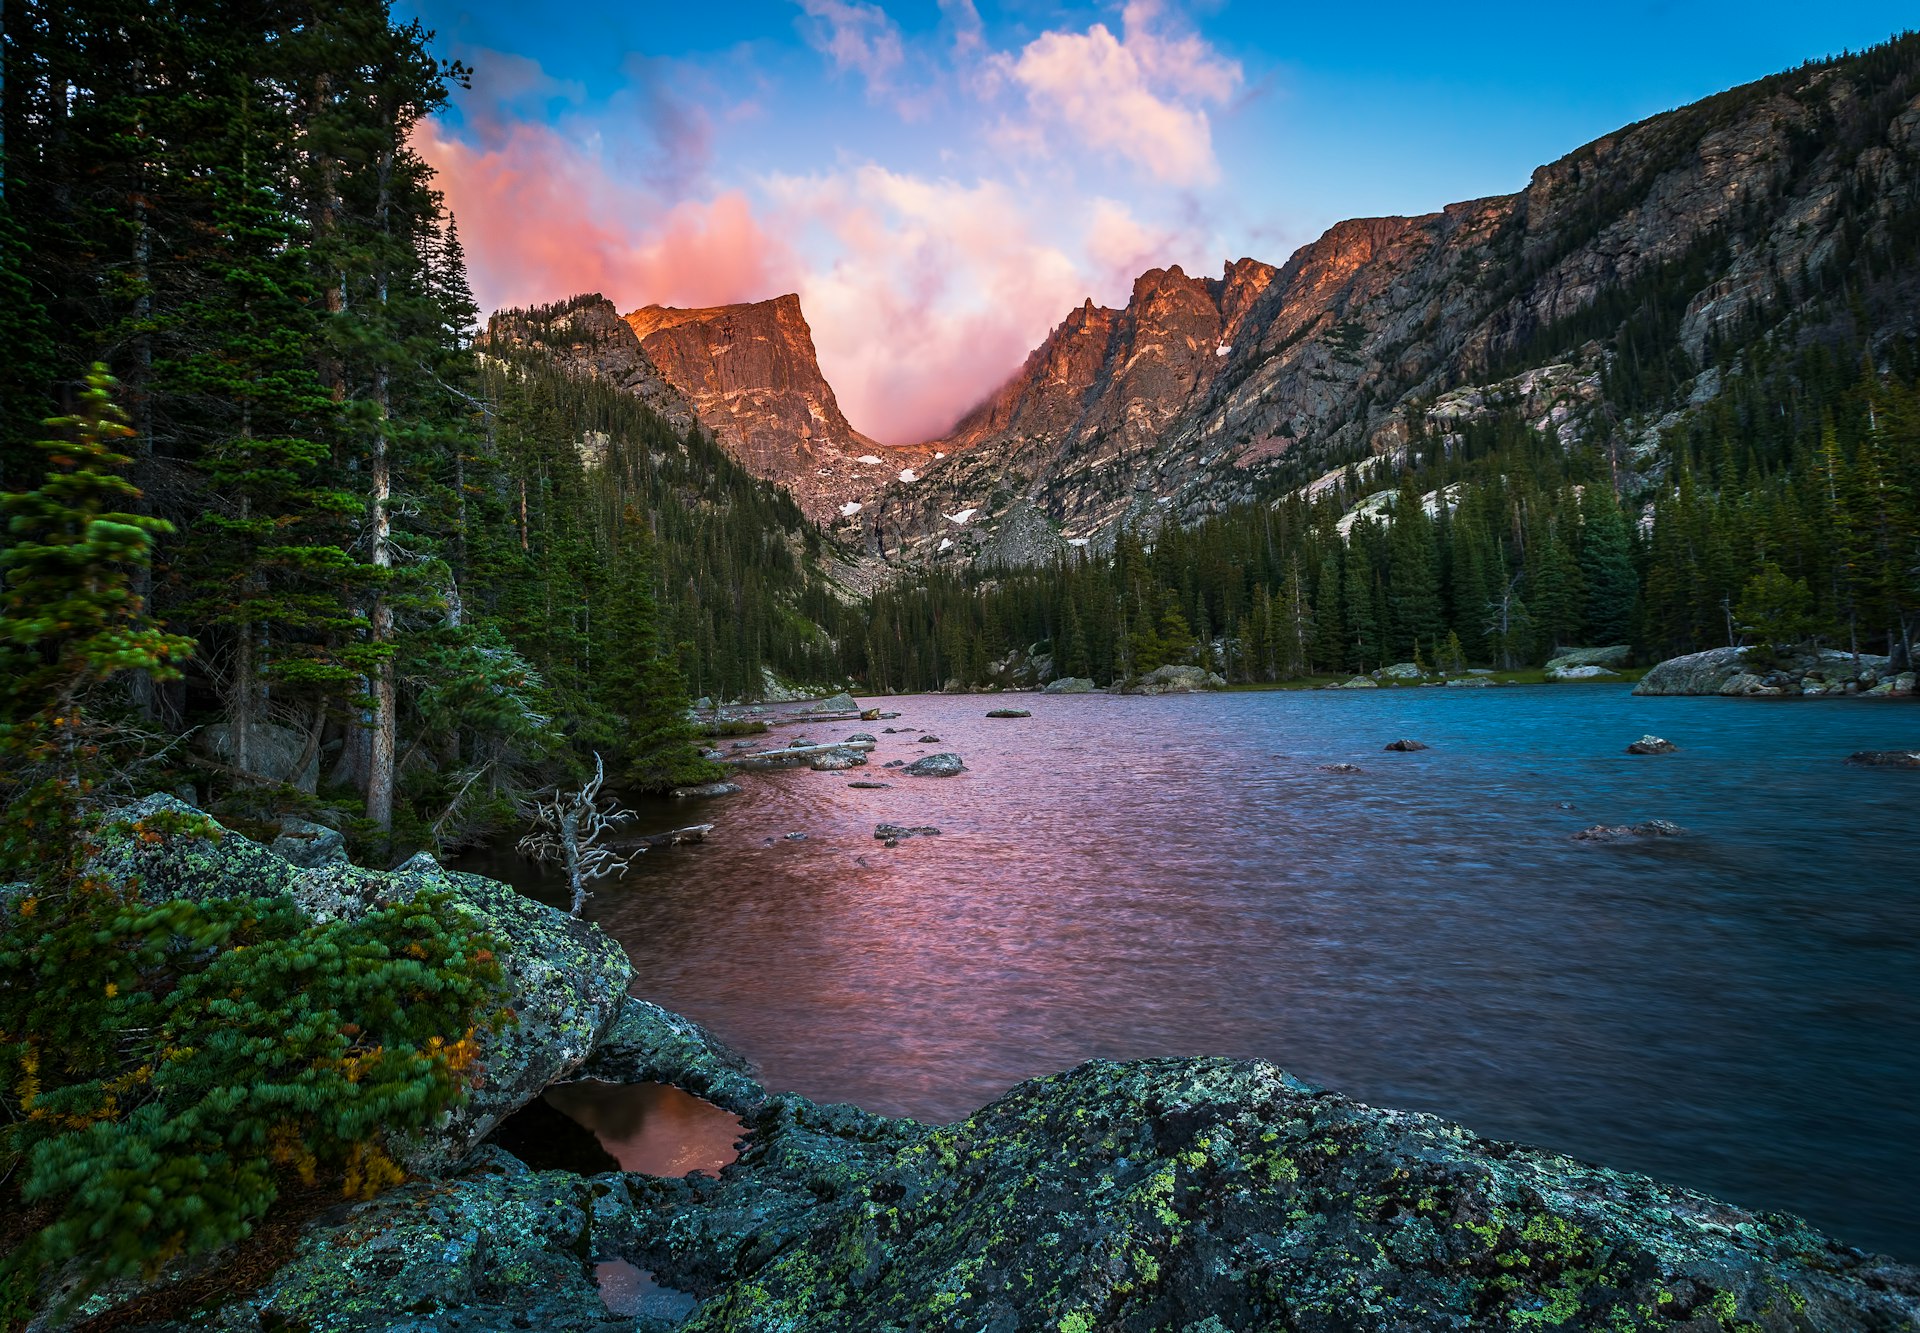 500px Photo ID: 82283883 - First light at sunrise - Dream Lake.  Rocky Mountain National Park, Colorado